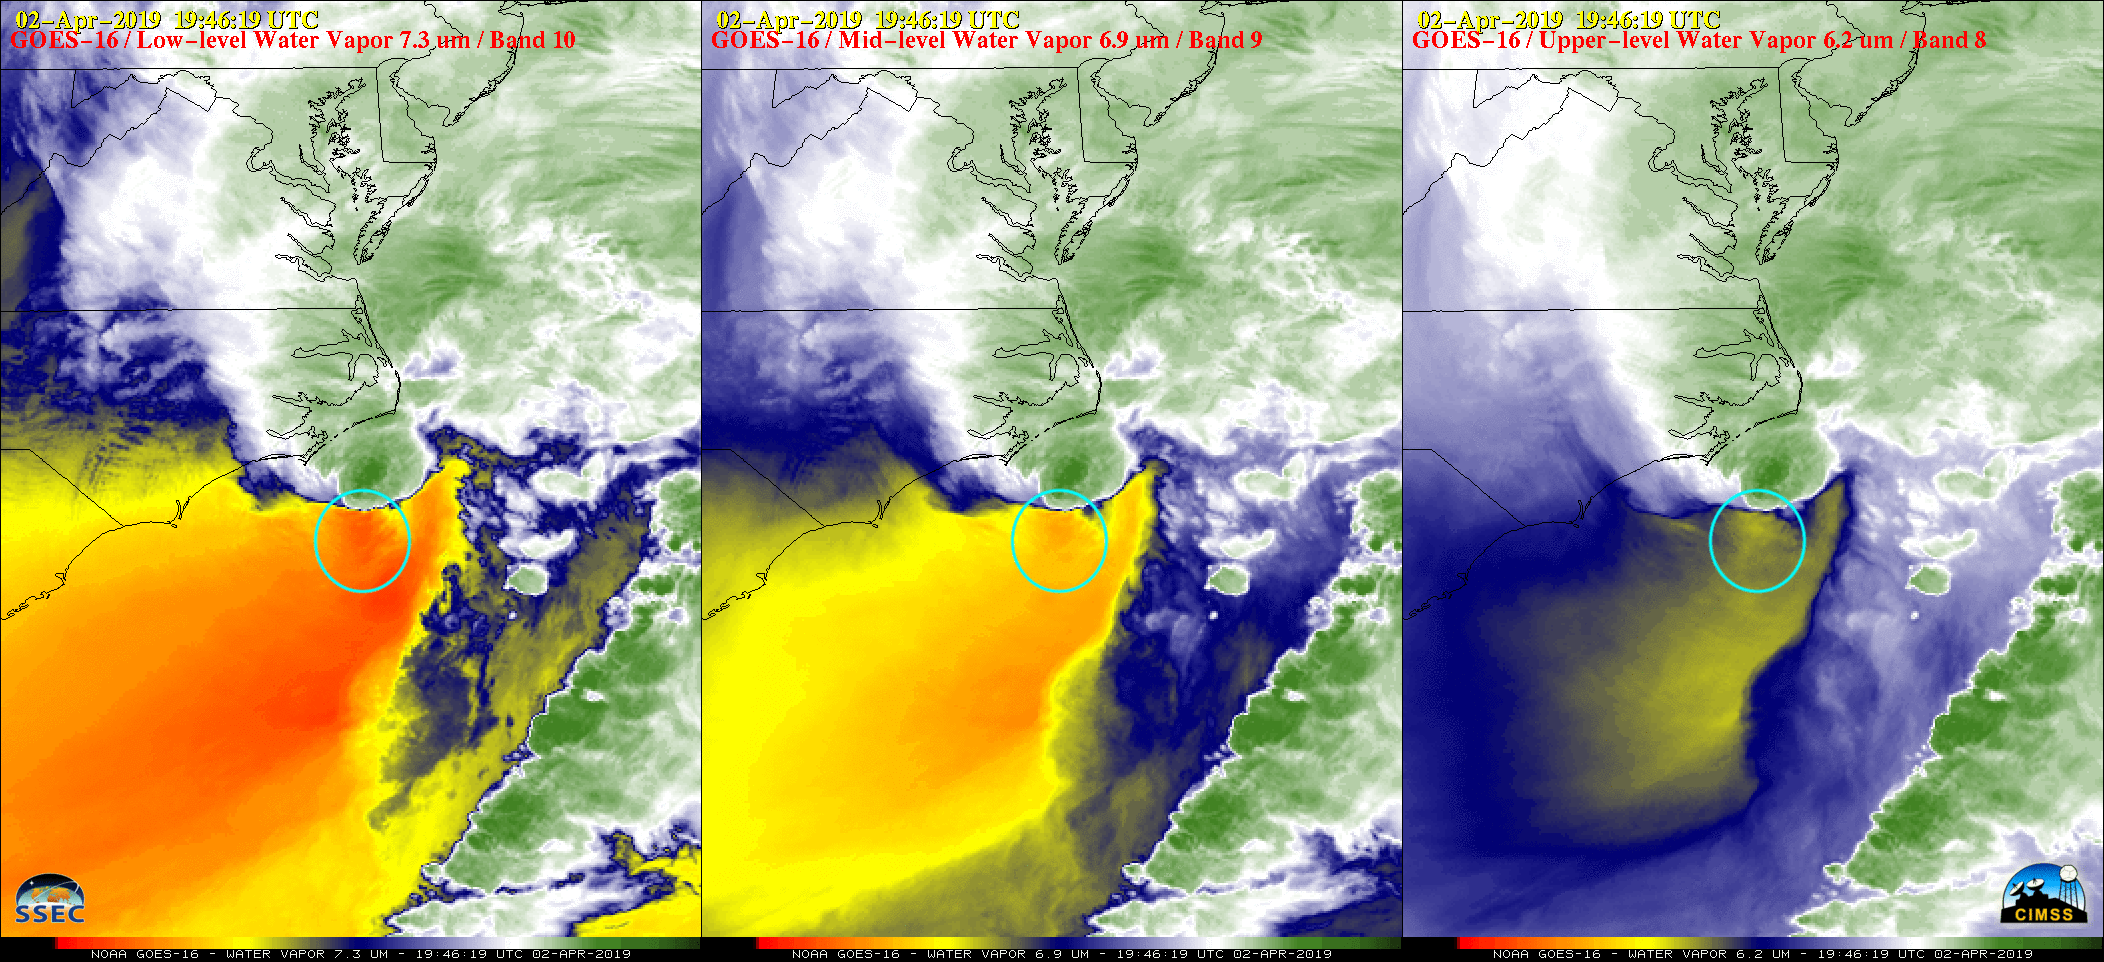 GOES-16 Low-level (7.3 µm), Mid-level (6.9 µm) and Upper-level (6.2 µm) Water Vapor images [click to play animation | MP4]